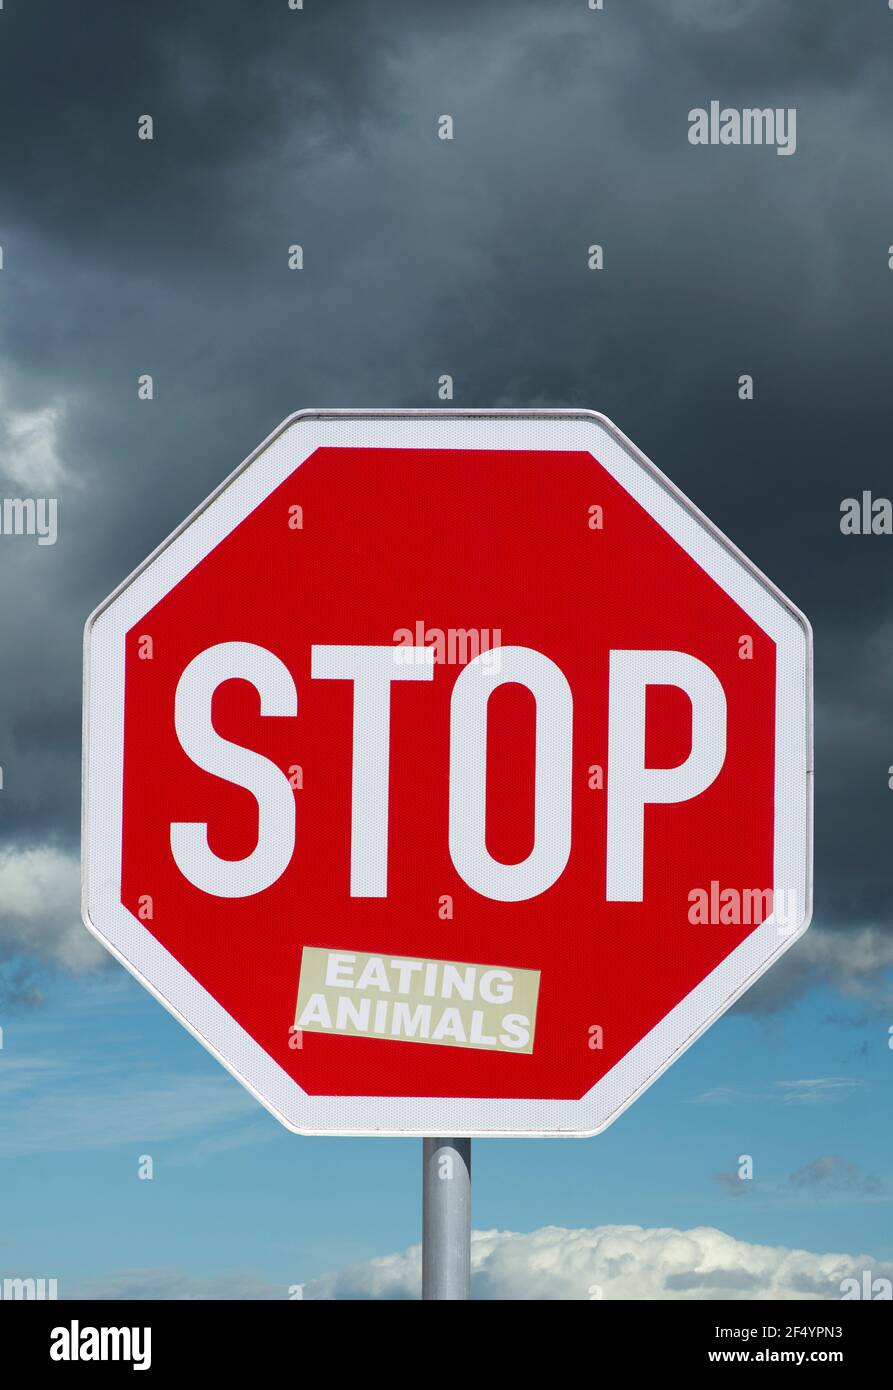 Road sign, Stop sign with sticker „eating animals“, sky with dark clouds, symbolic picture for stopping eating animals, Stock Photo